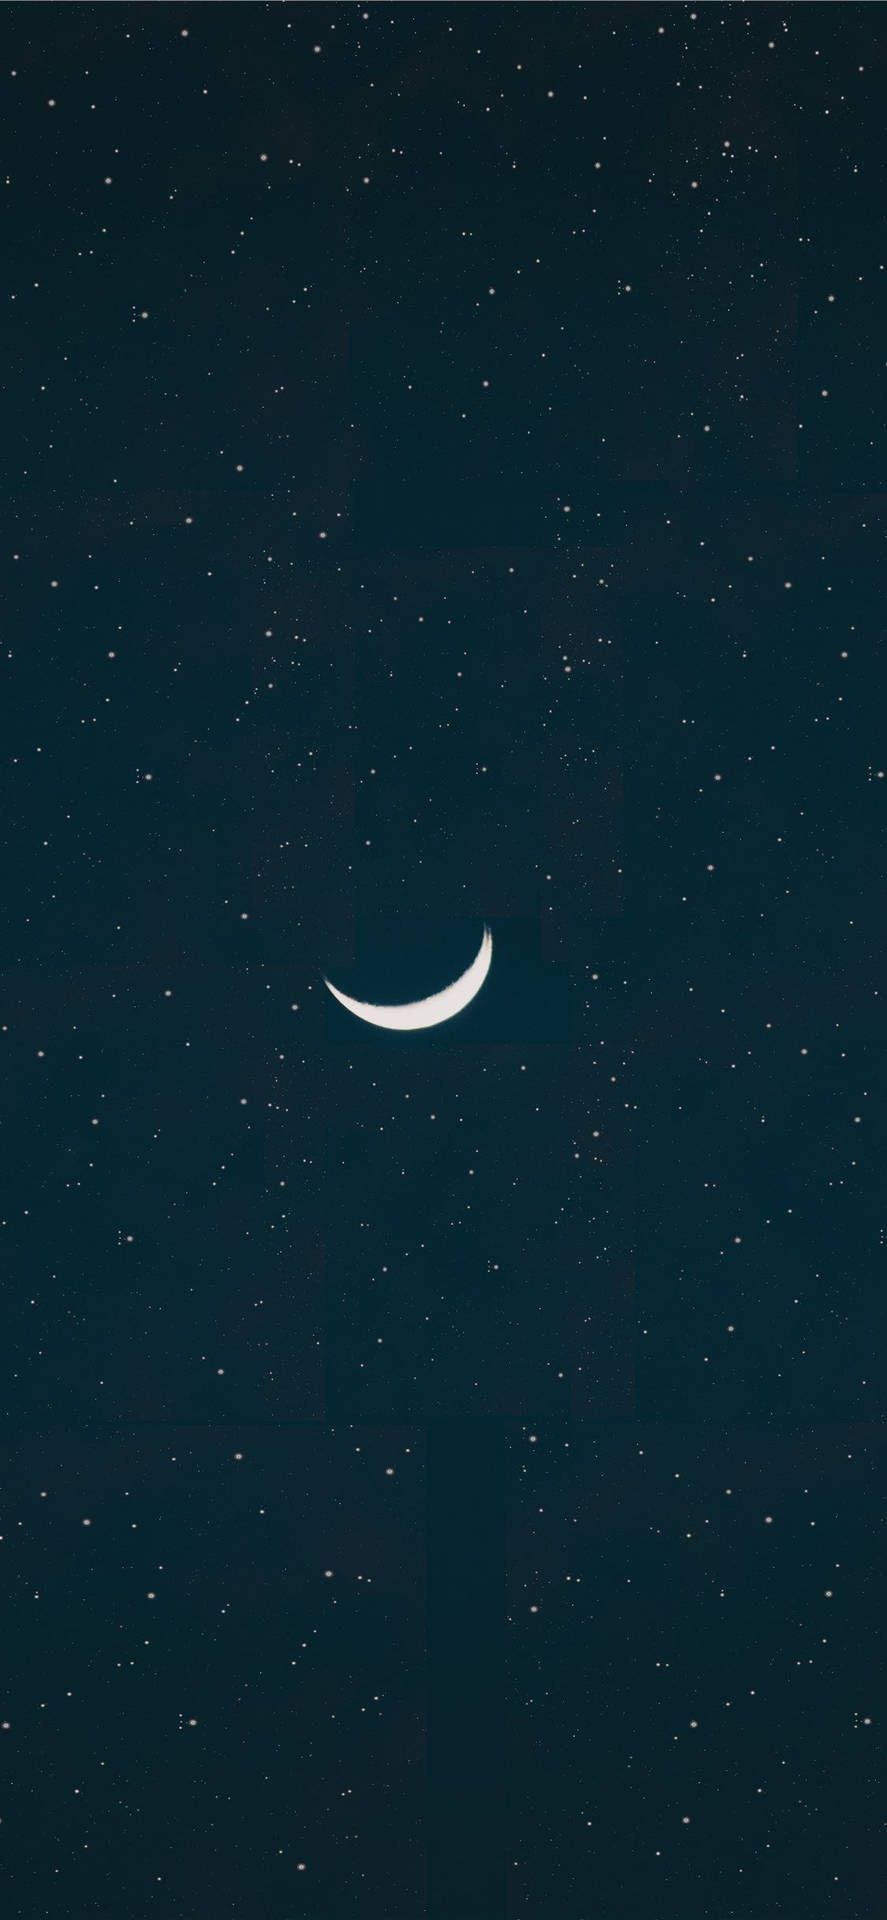 IPhone wallpaper of a crescent moon in a starry night sky - Moon